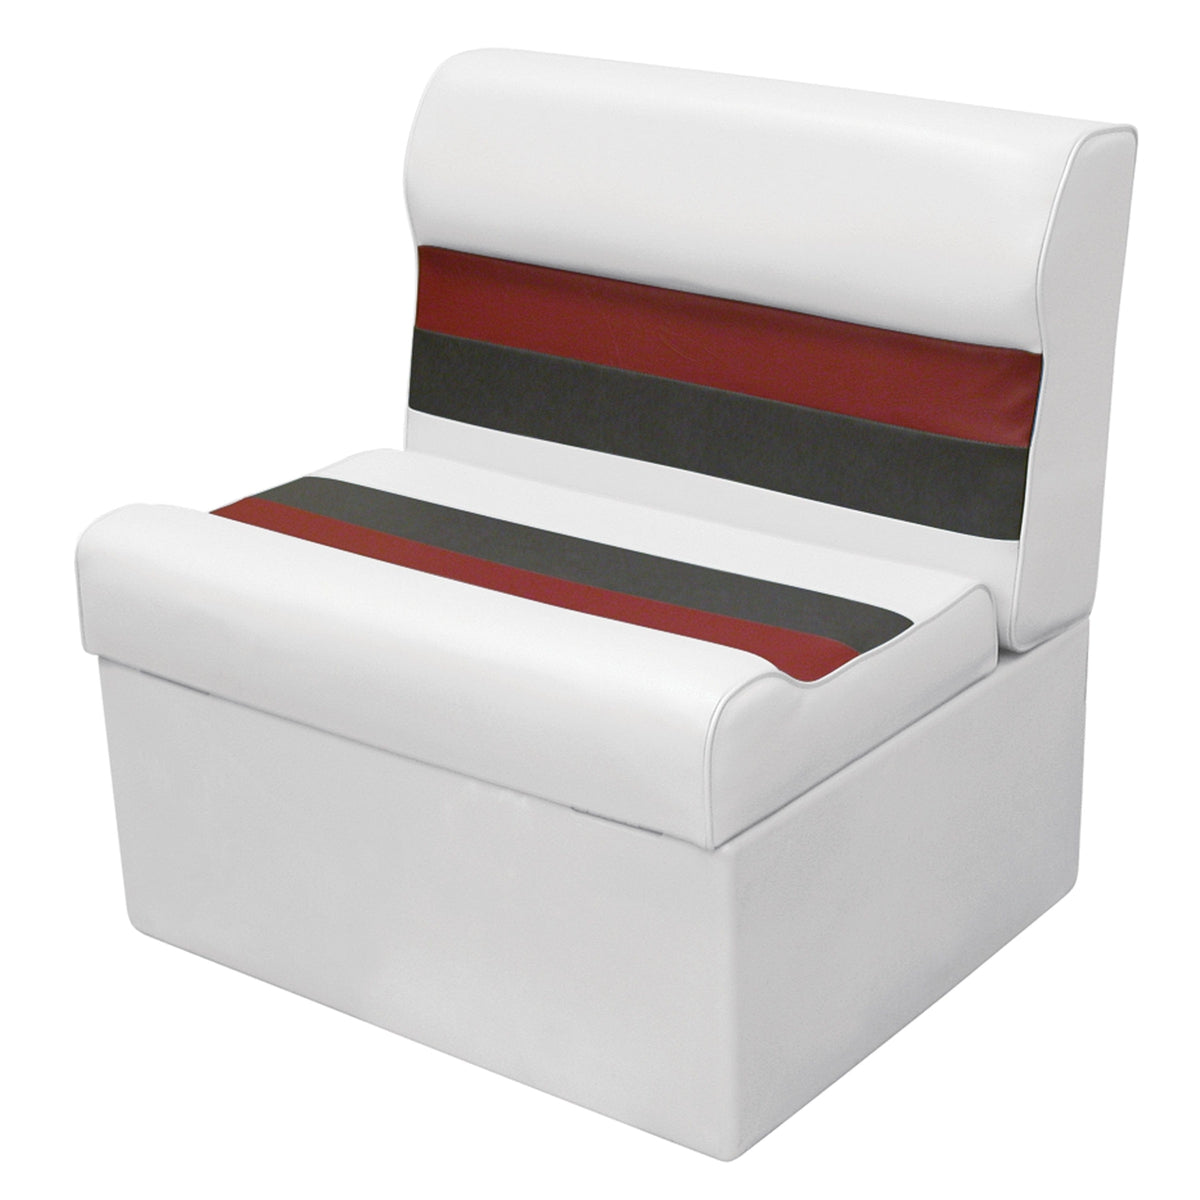 Wise Oversized - Not Qualified for Free Shipping Wise 27" Lounge Seat White/Charcoal/Red #8WD95-1009